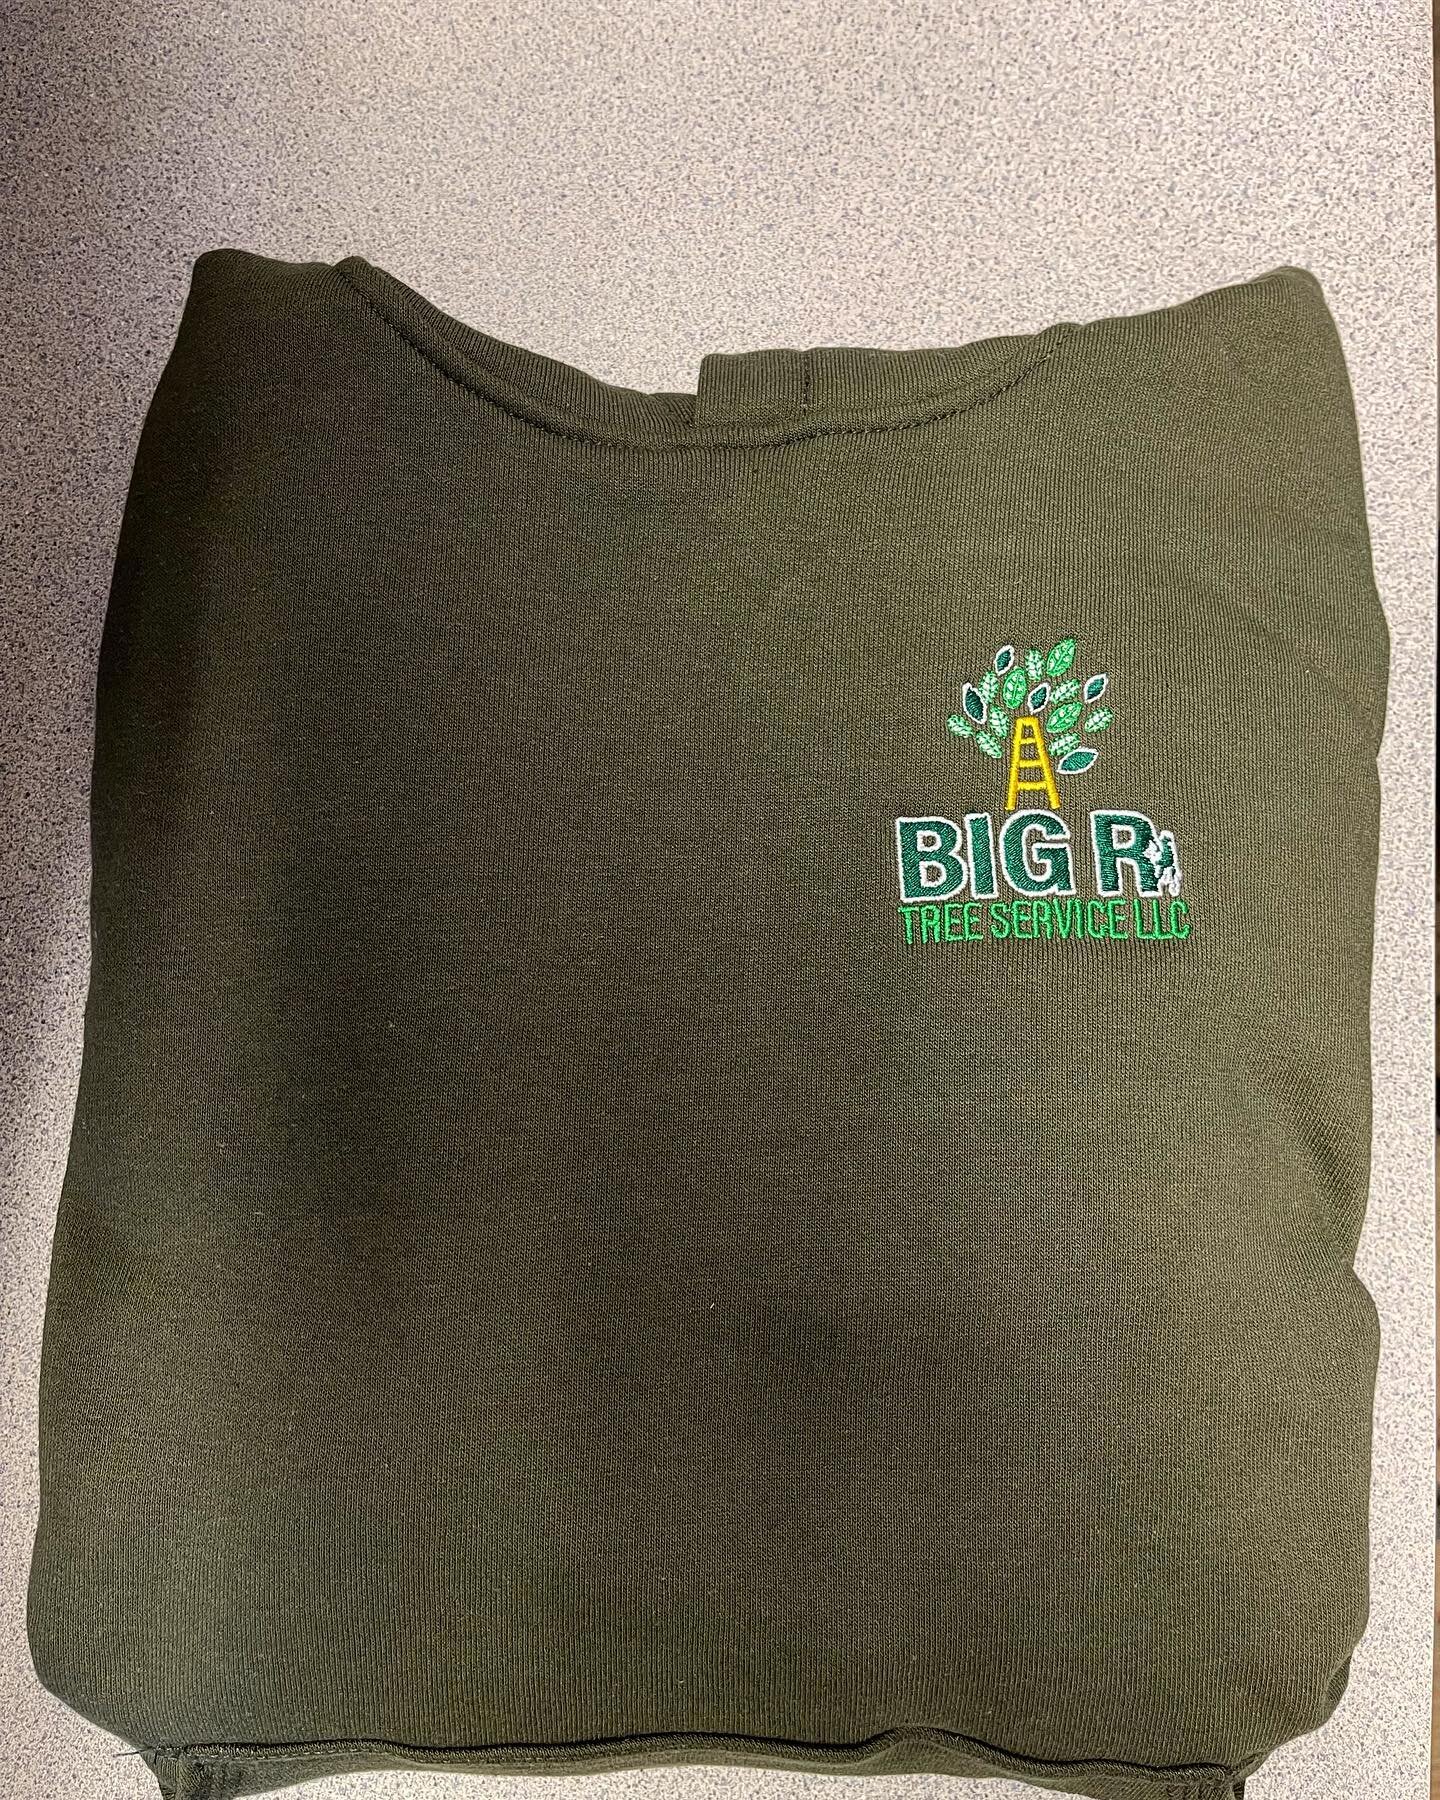 Embroidery done on the front &amp; back ! @bigrtreeservice 👌